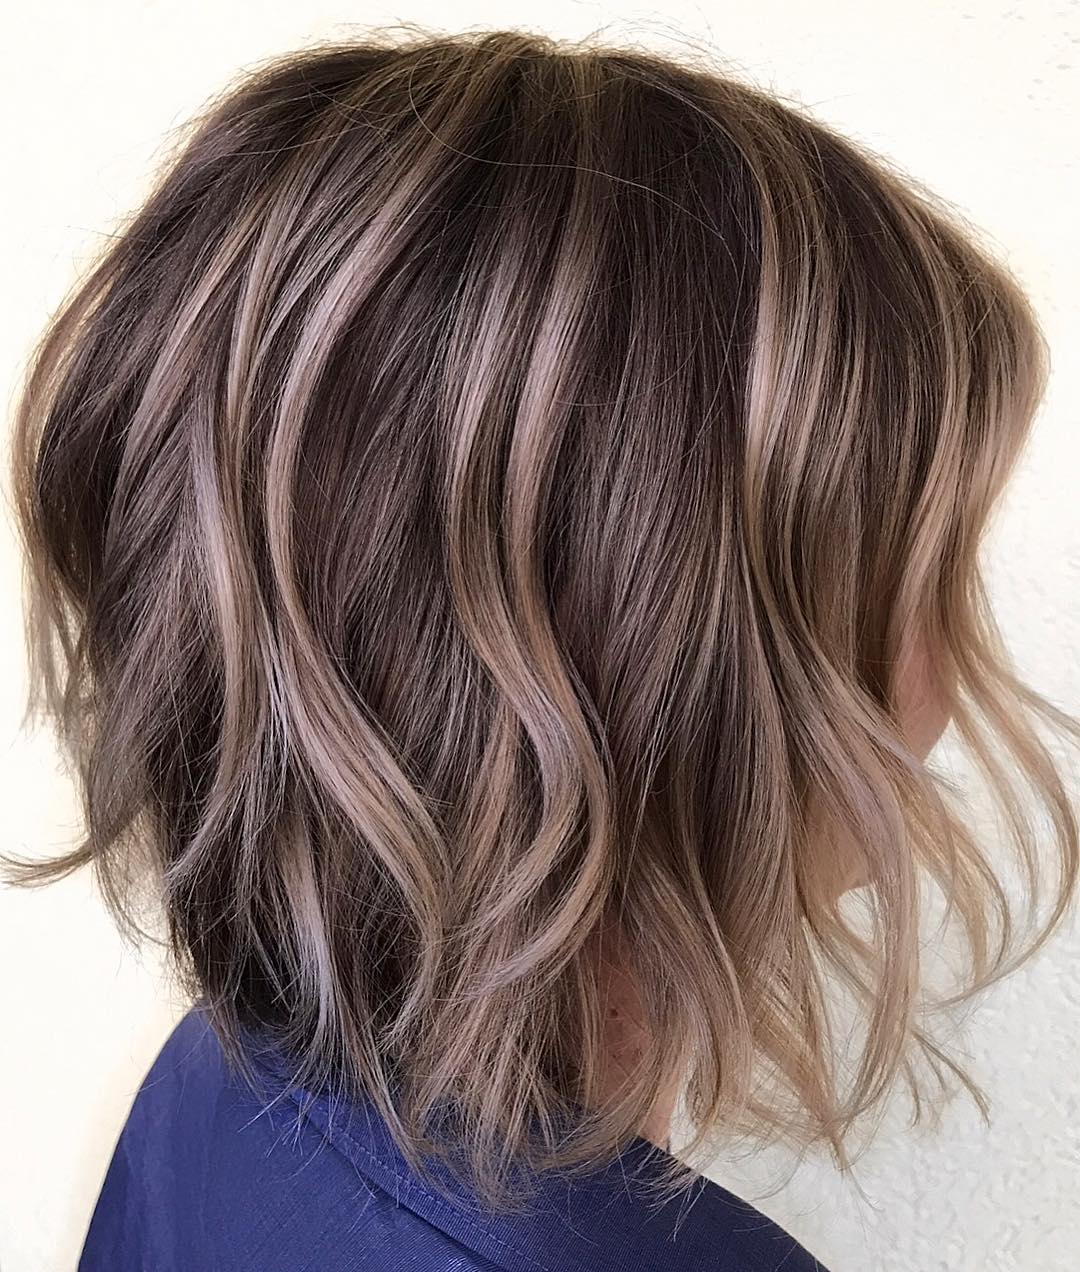 Messy Wavy Bob Hairstyle With Chin-Length Layers